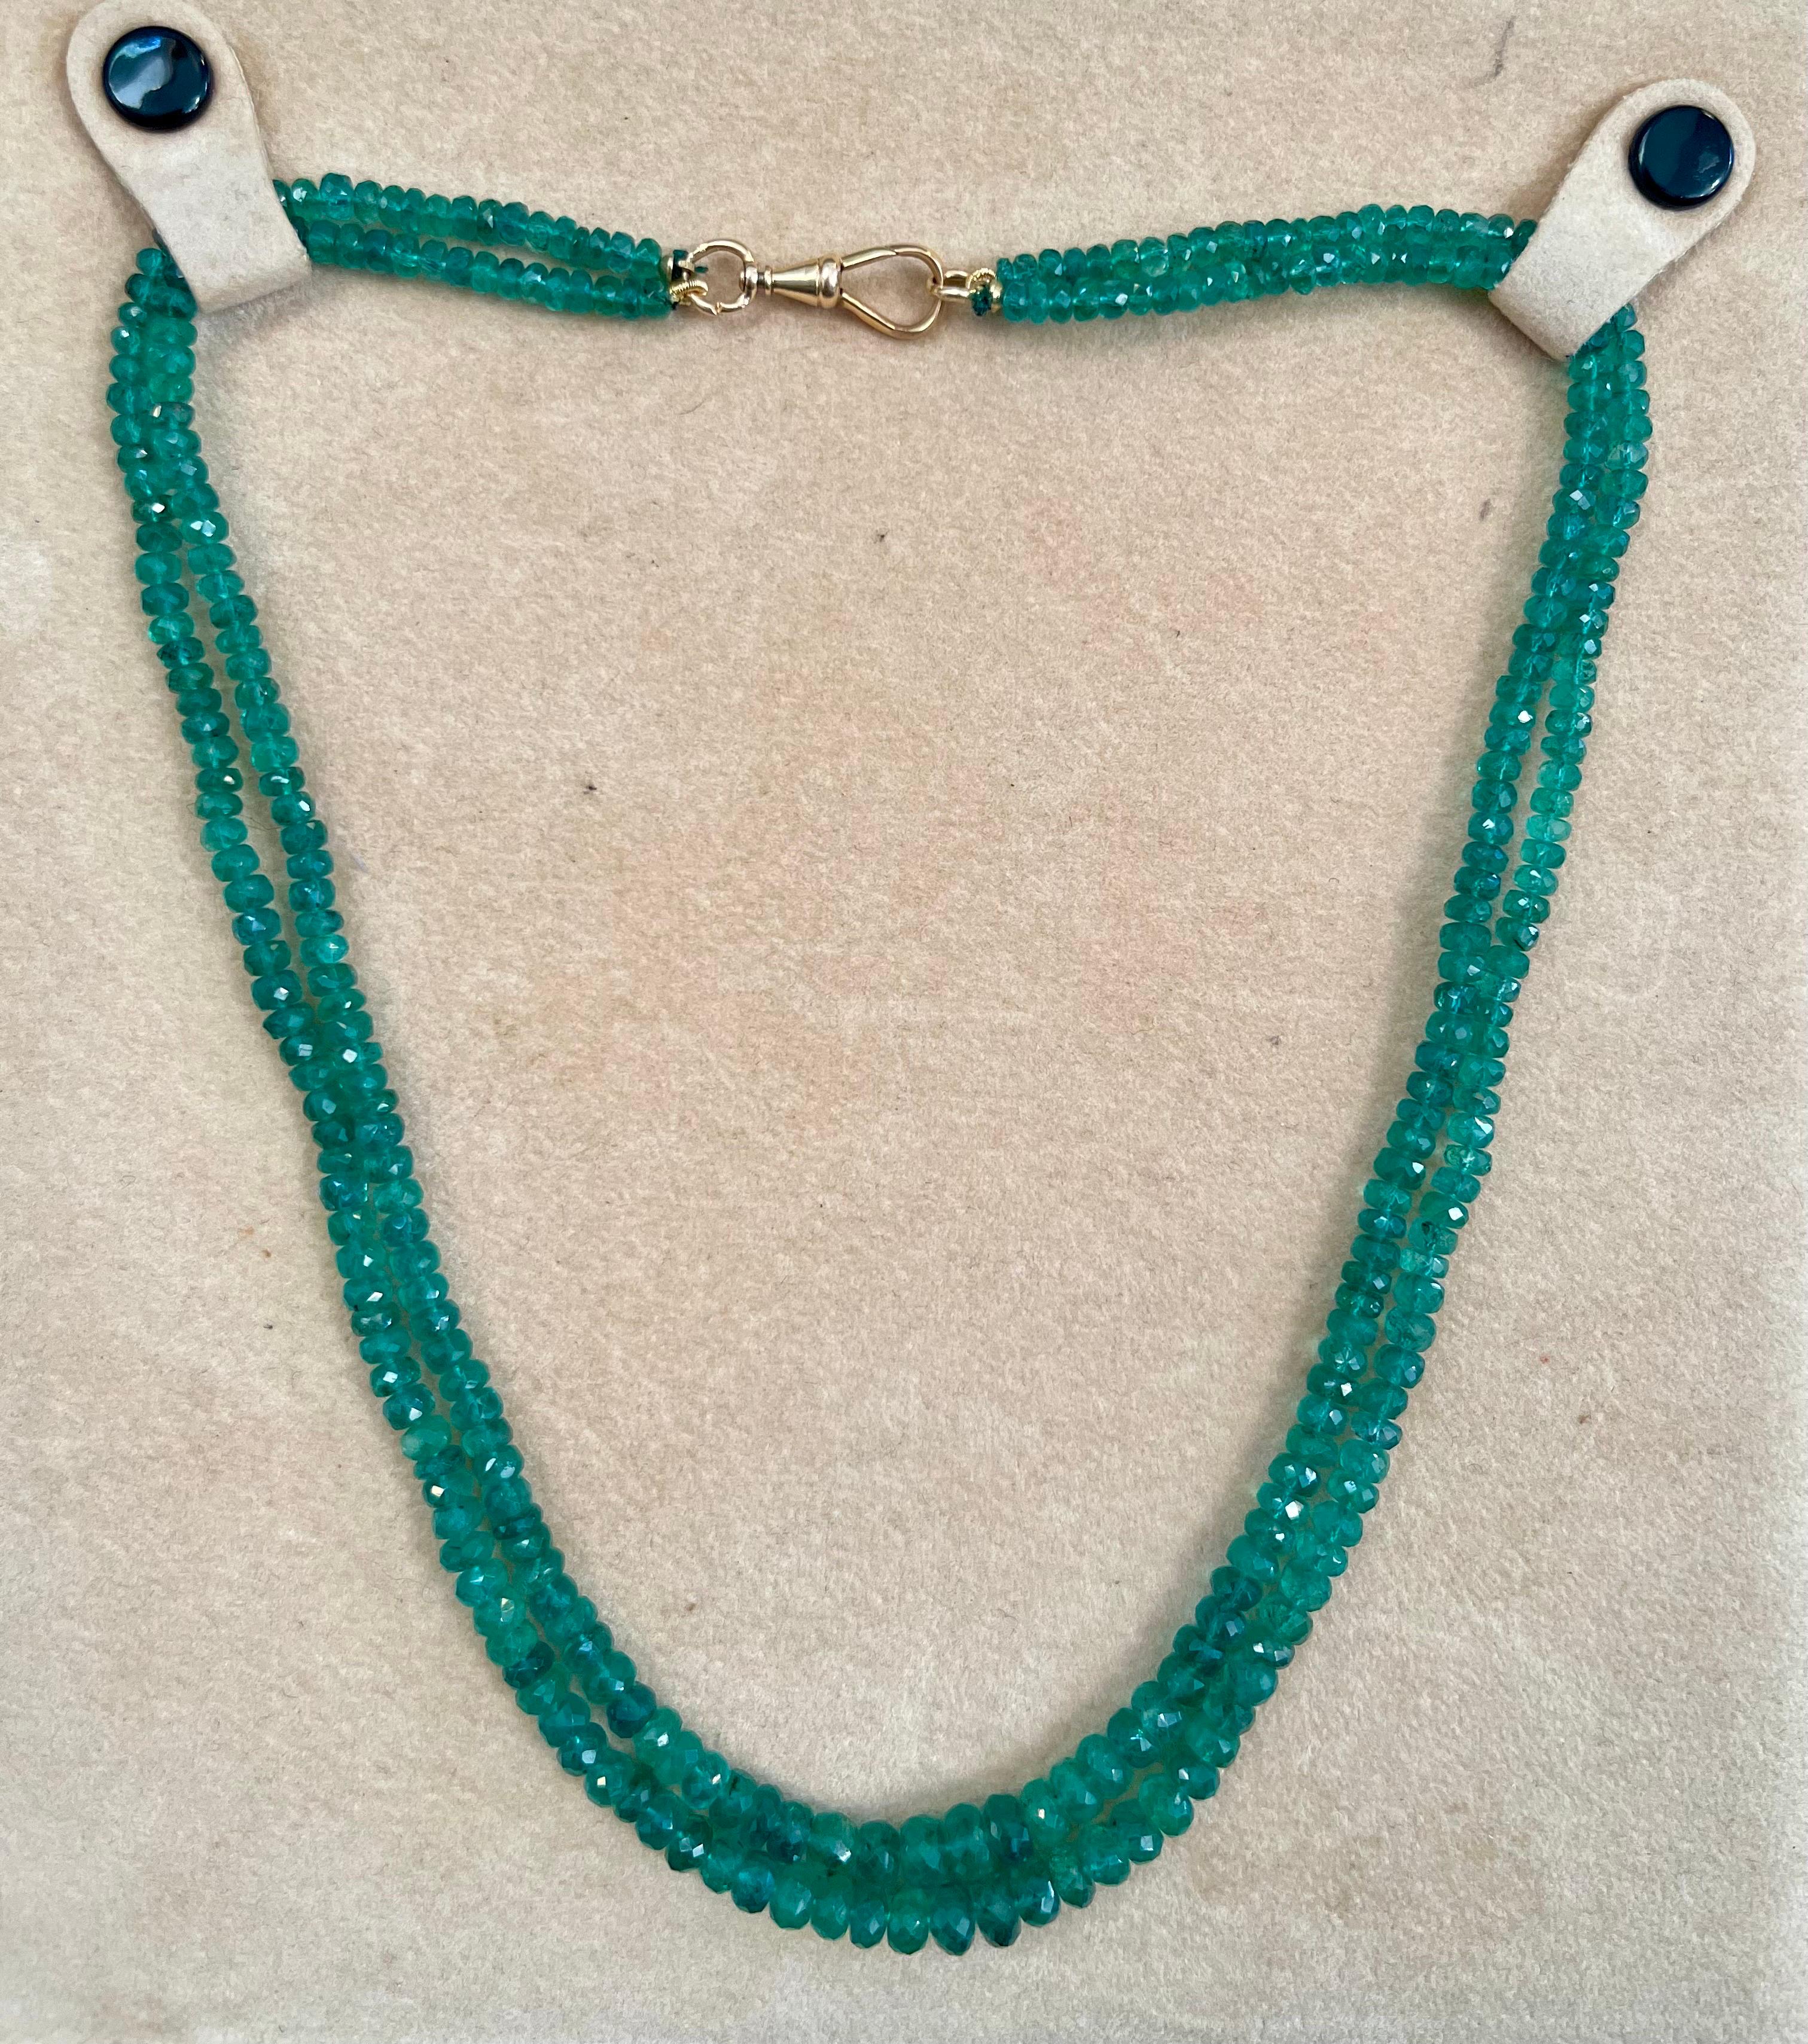 145 Ct Fine Natural Emerald Beads 2 Line Necklace with 14 Kt Yellow Gold Clasp In Excellent Condition For Sale In New York, NY